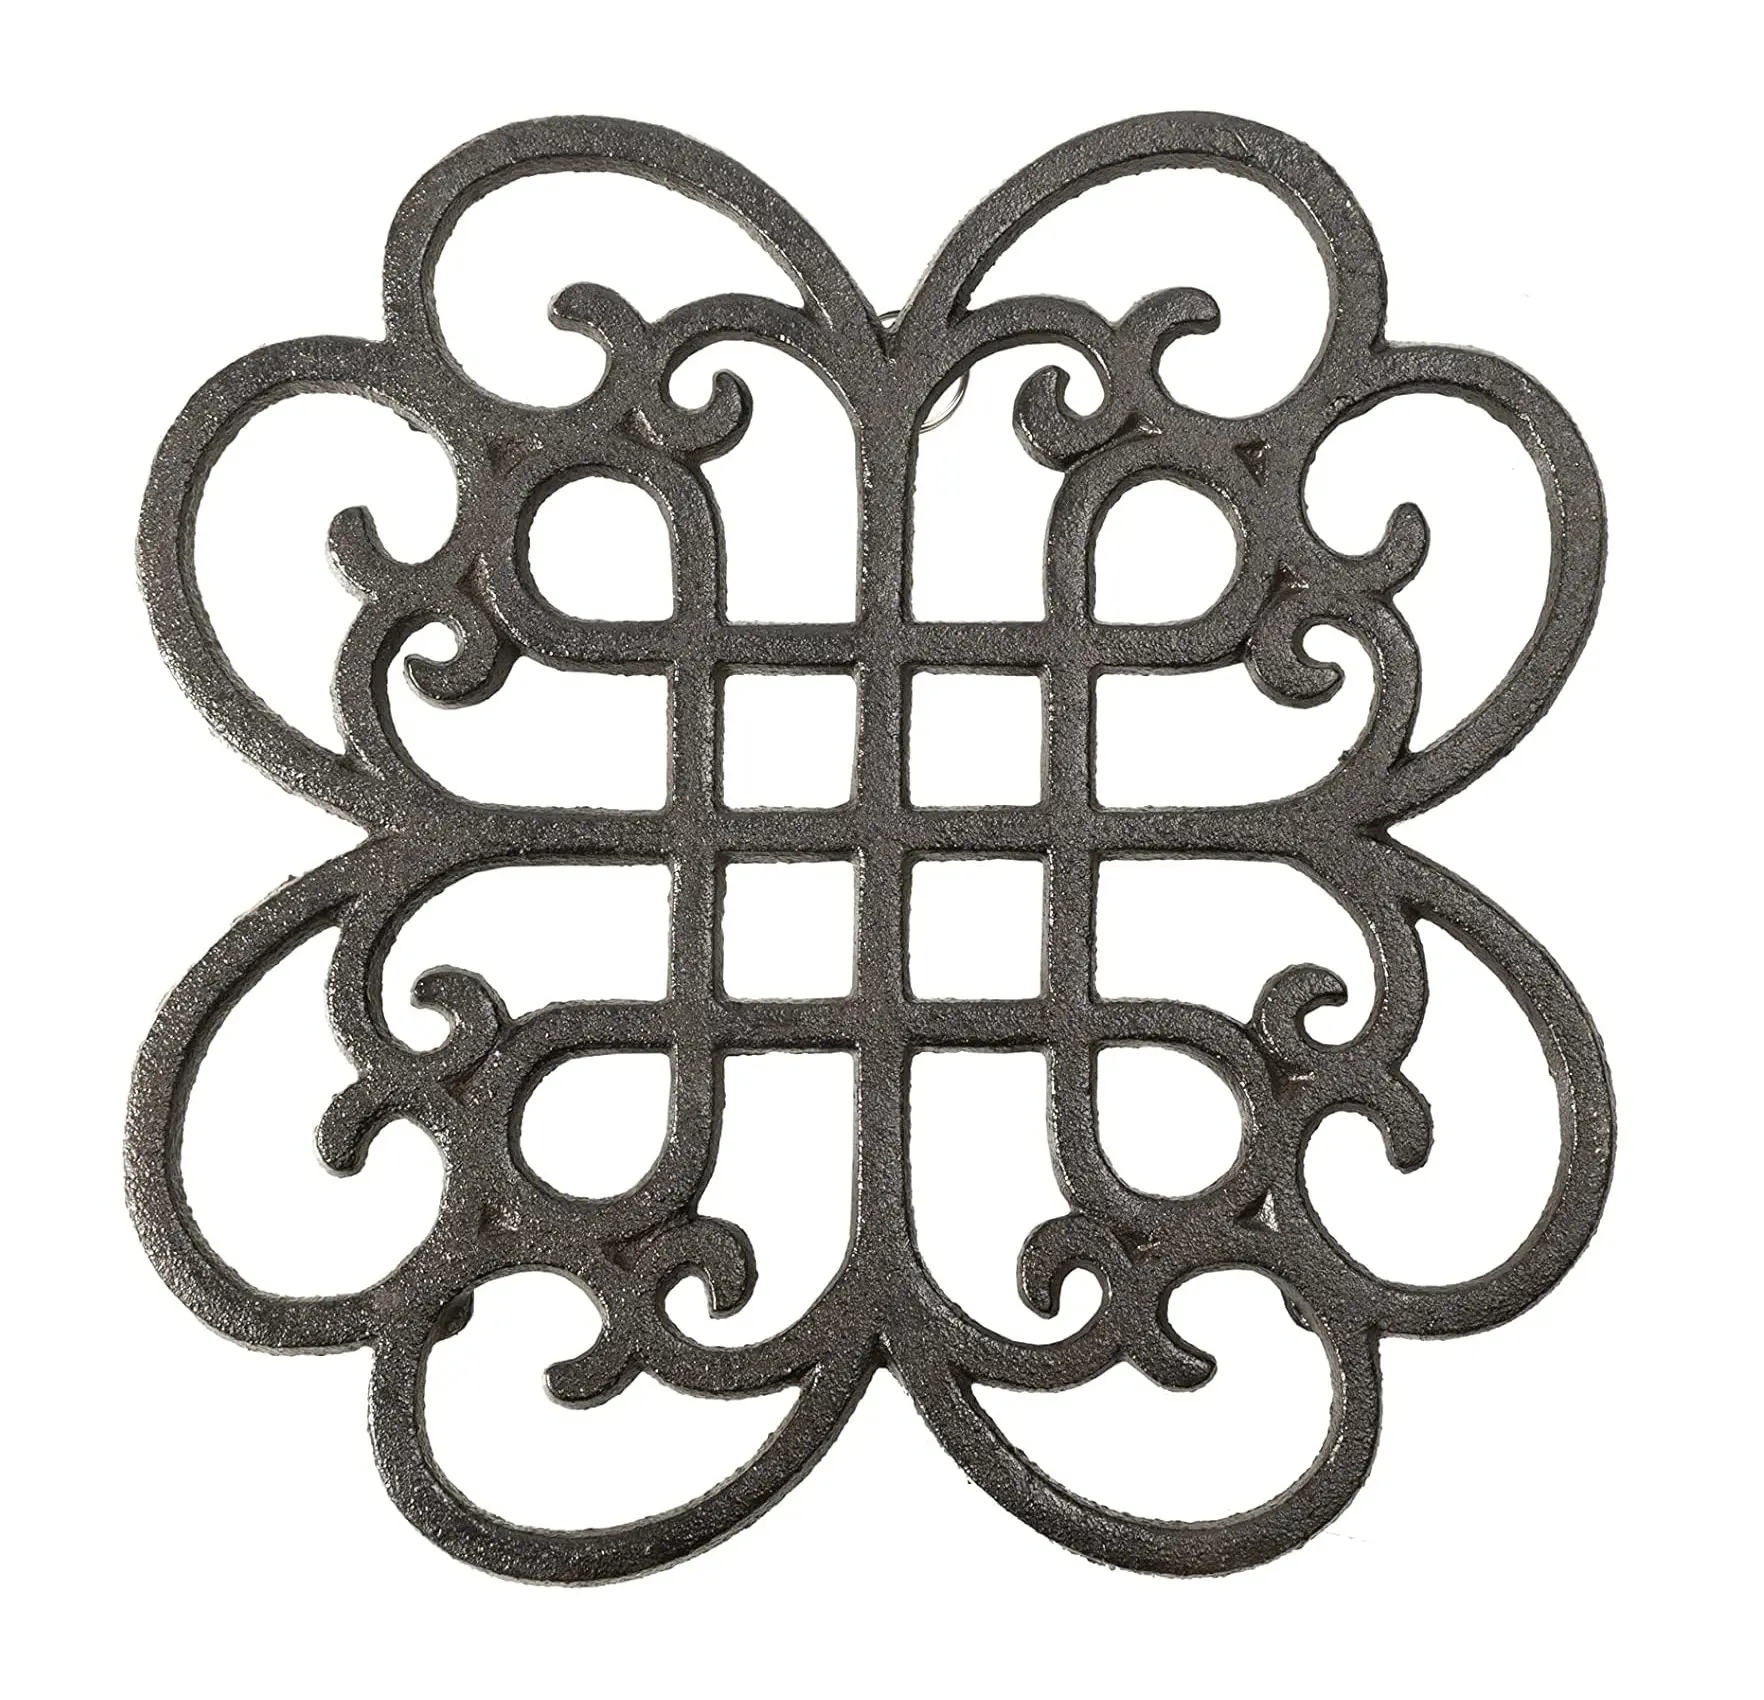 Iron Vintage Oval Trivet for Kitchen Top or Dining Table to Place Hot Dishes Decorative Pot Holders